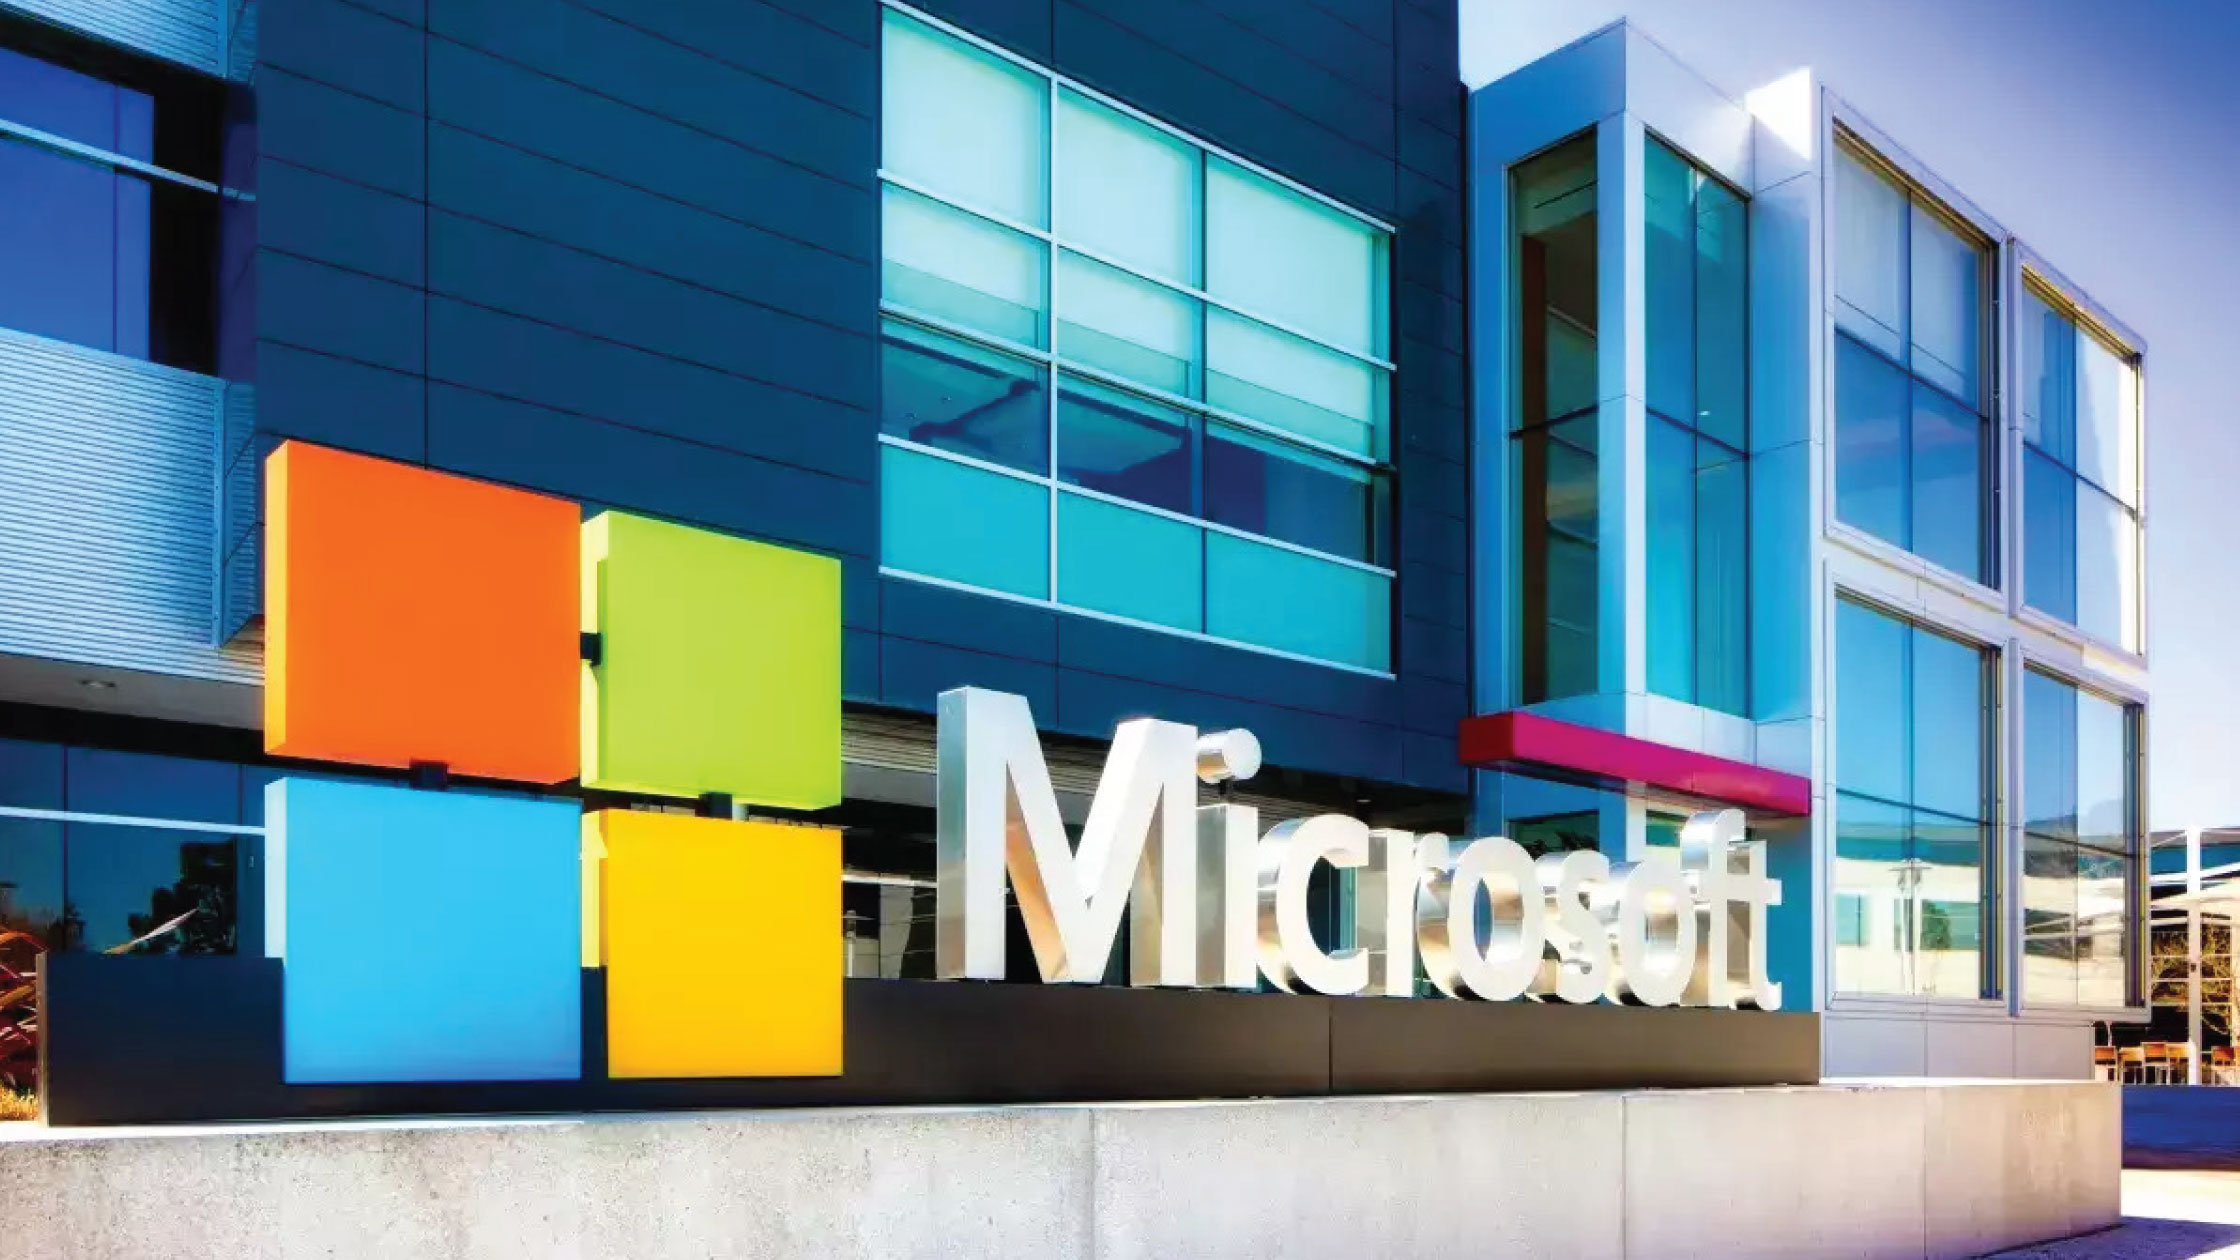 Microsoft Shares: Here’s Why They Jumped Over 8% in After Hours